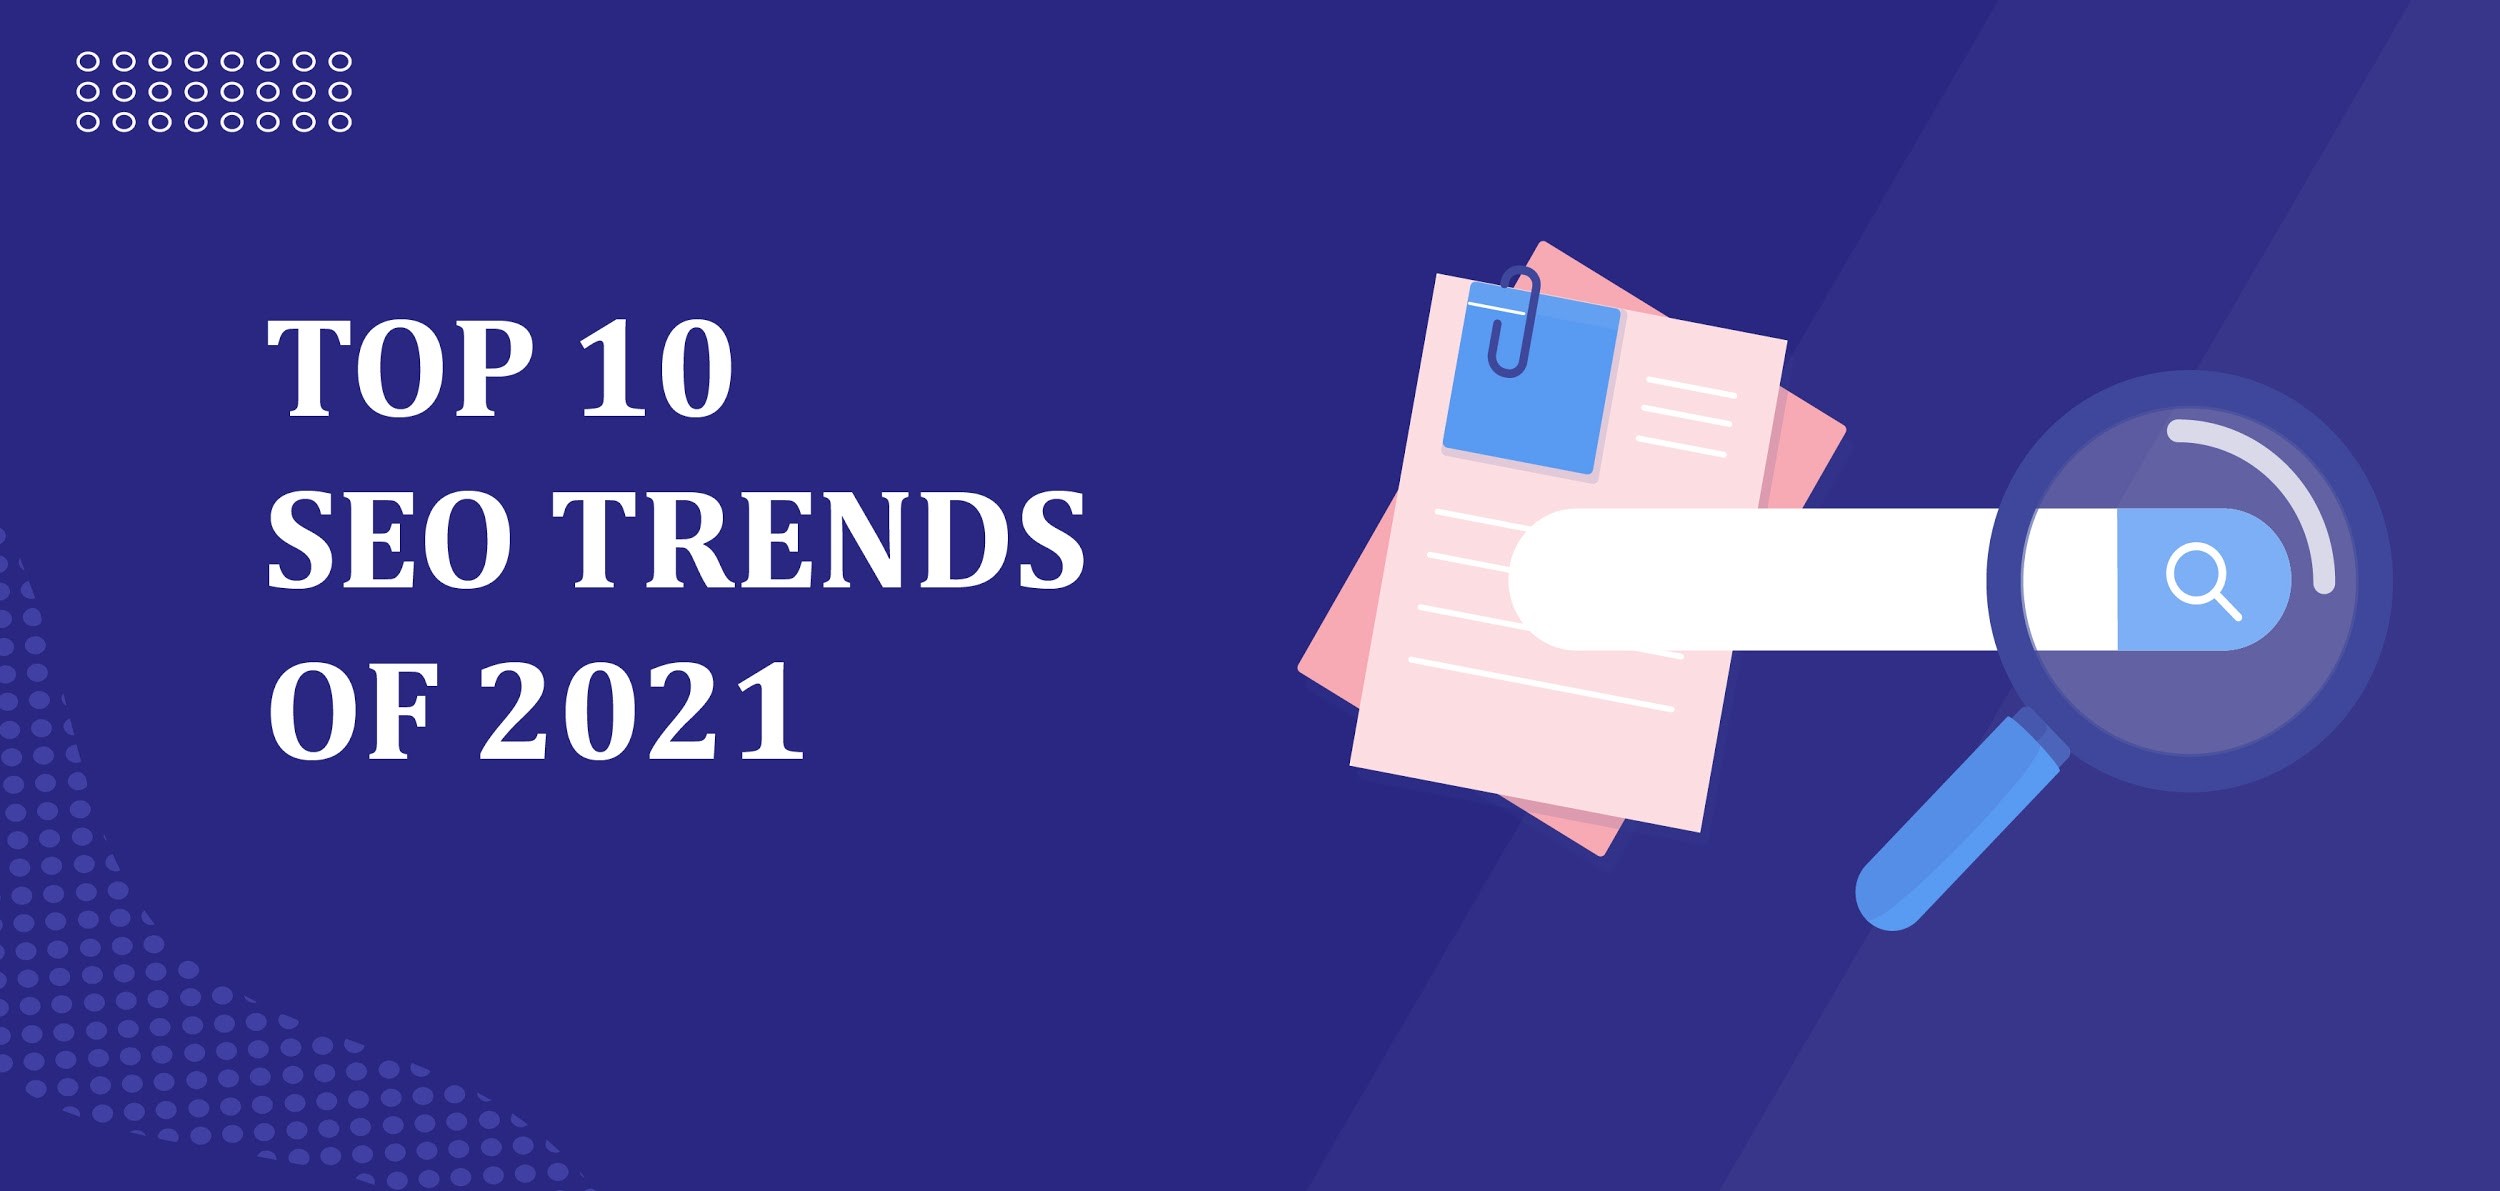 Top 10 SEO Topics That You Need To Know for 2021